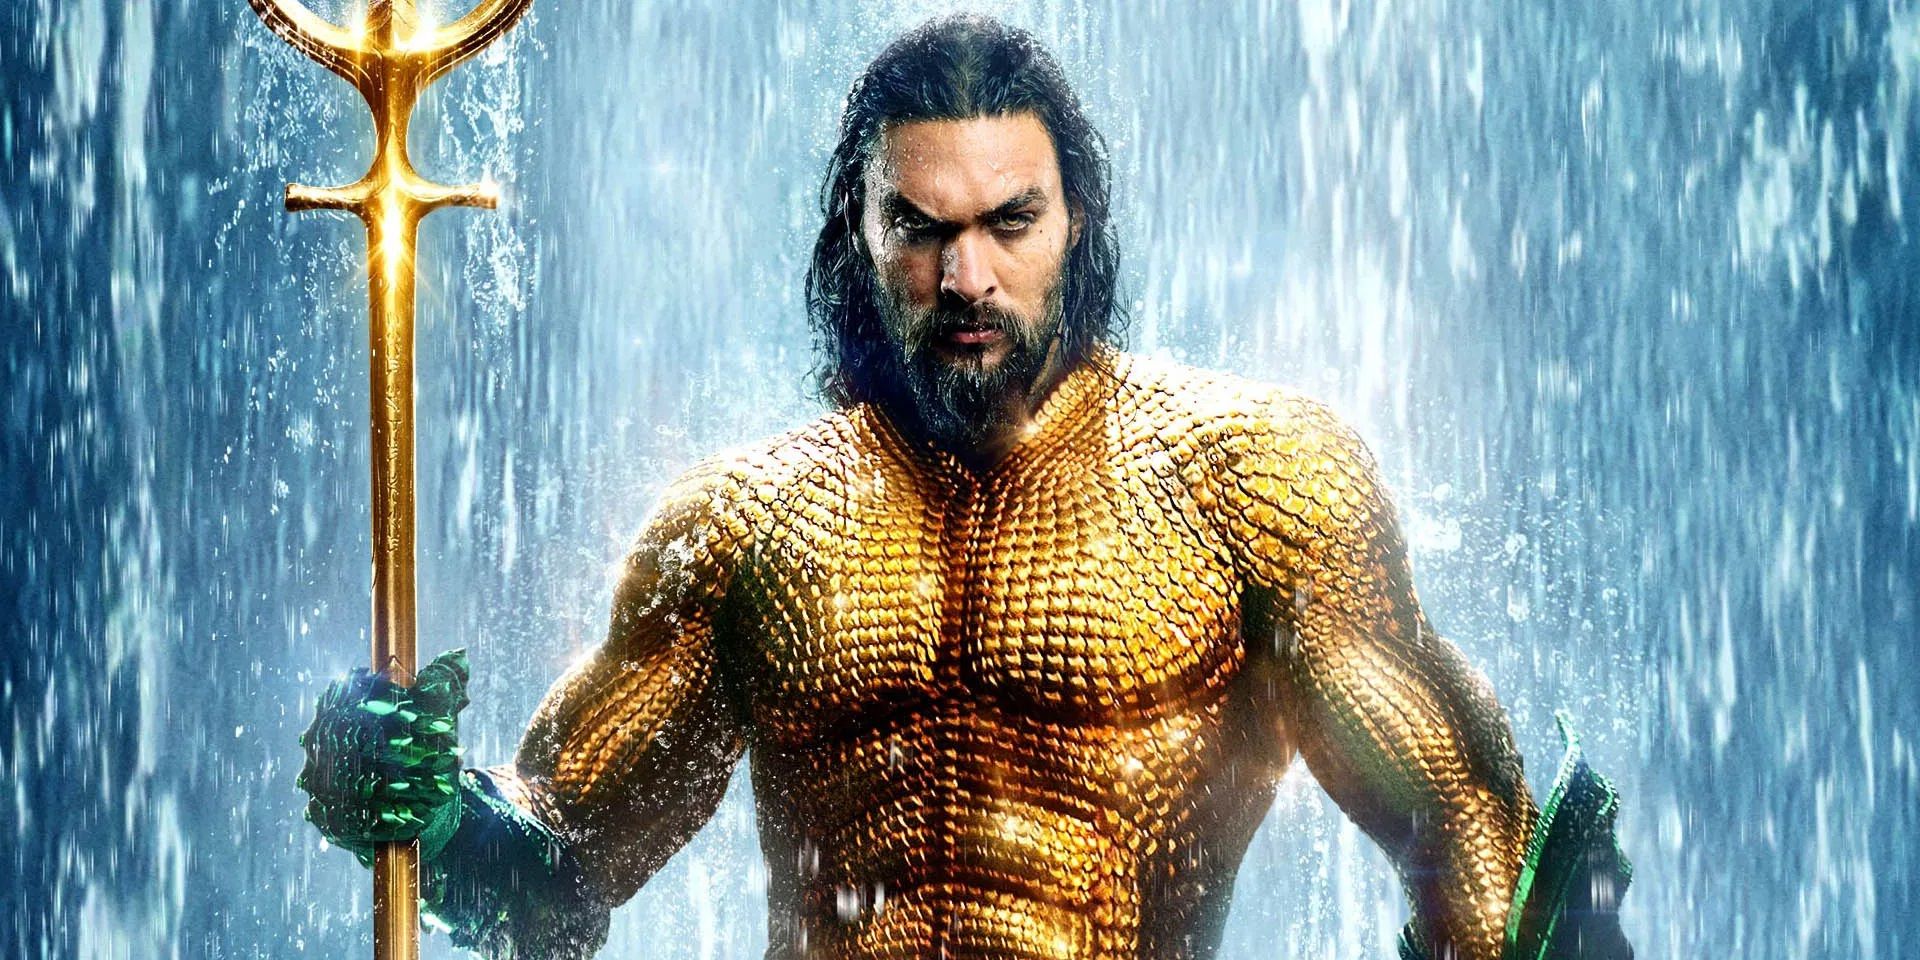 Jason Momoa as Aquaman in a poster for the first movie